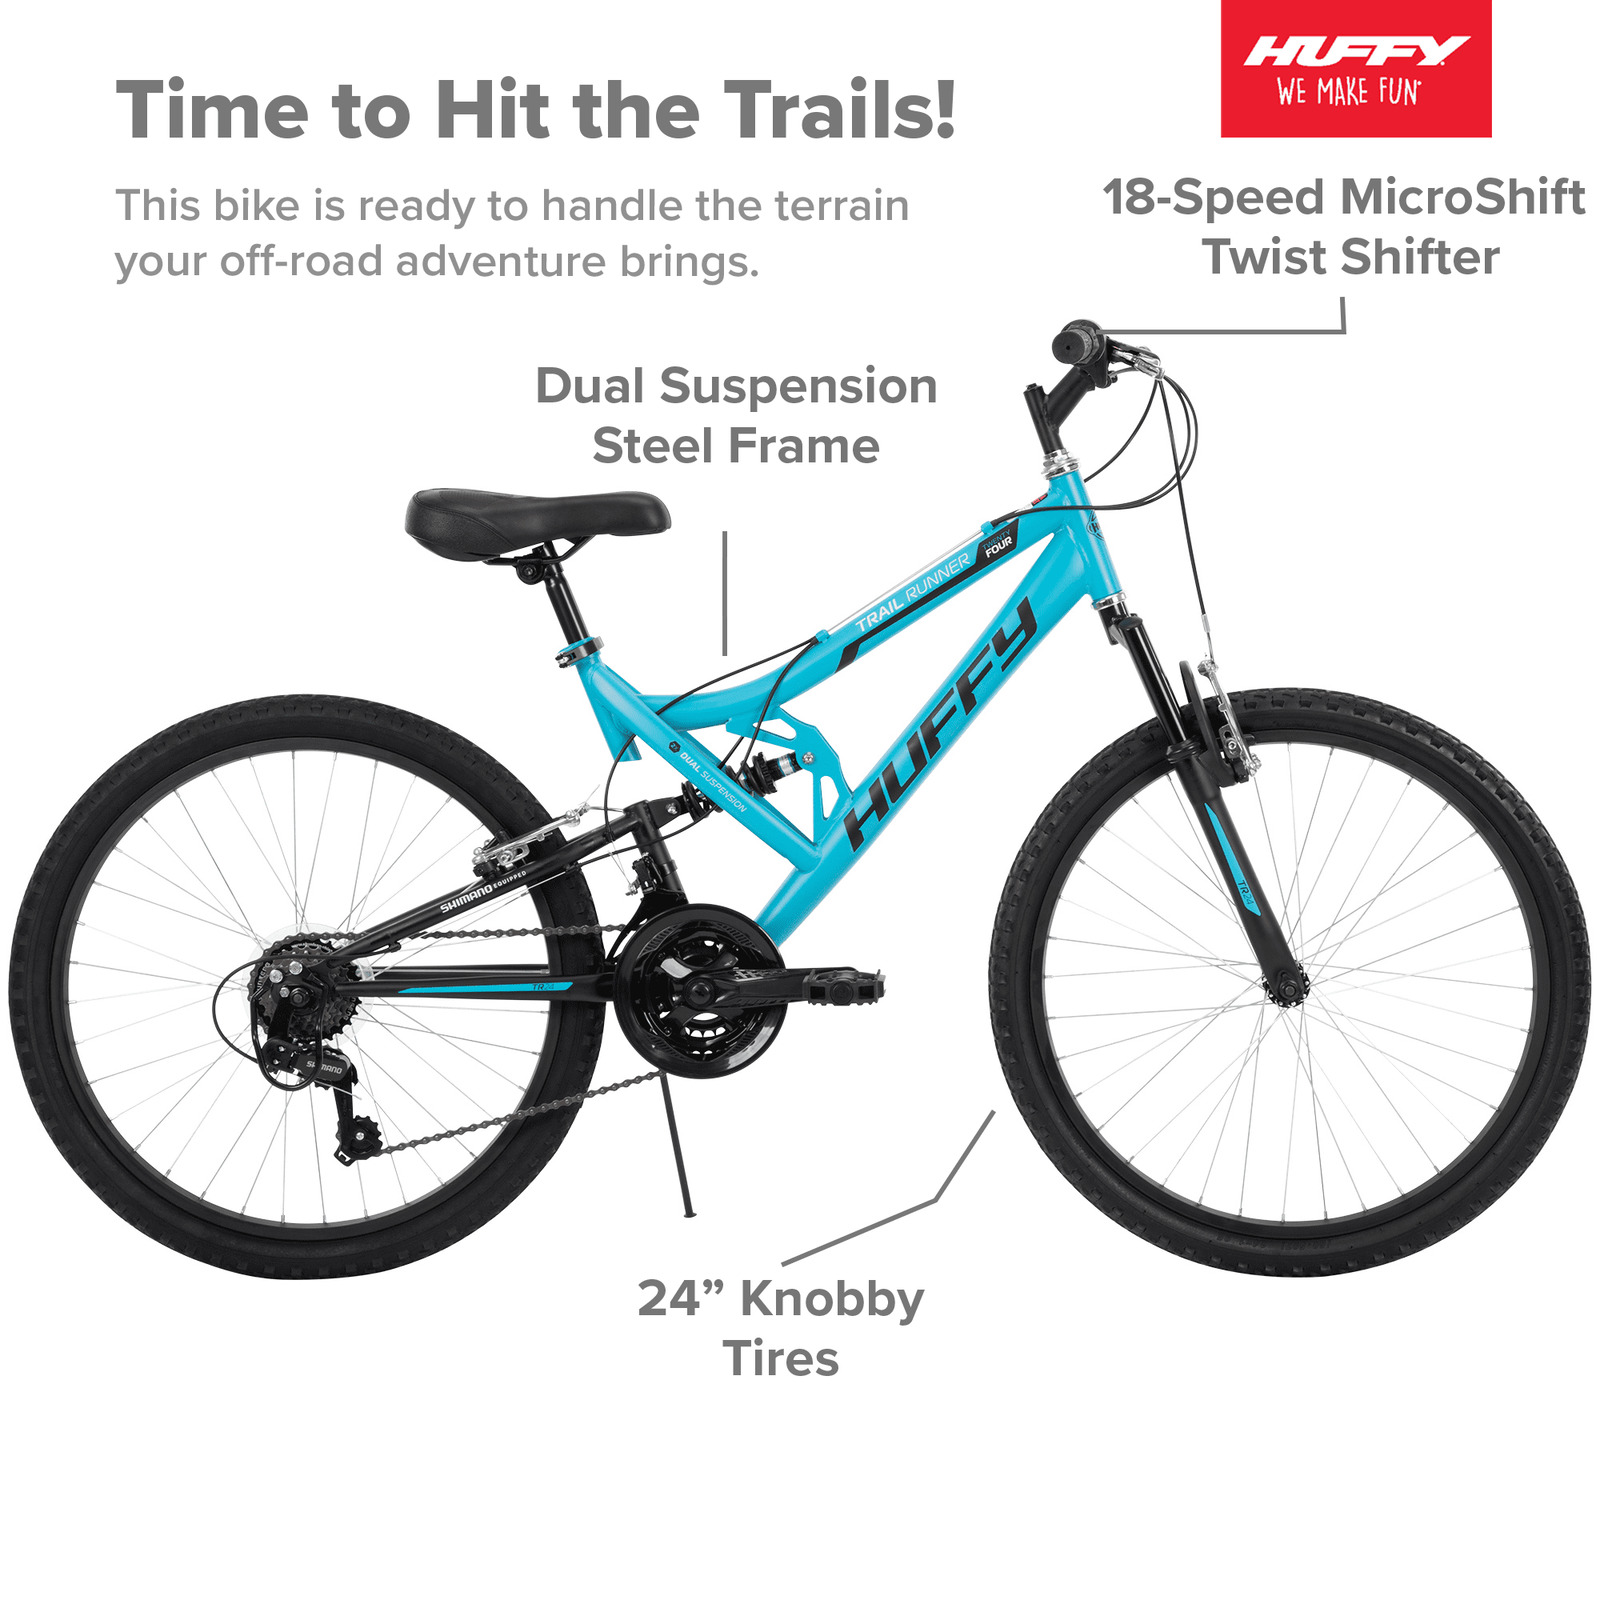 24" Trail Runner Girls Full Suspension Mountain Bikes, Ages 12+ Years, Teal Blue